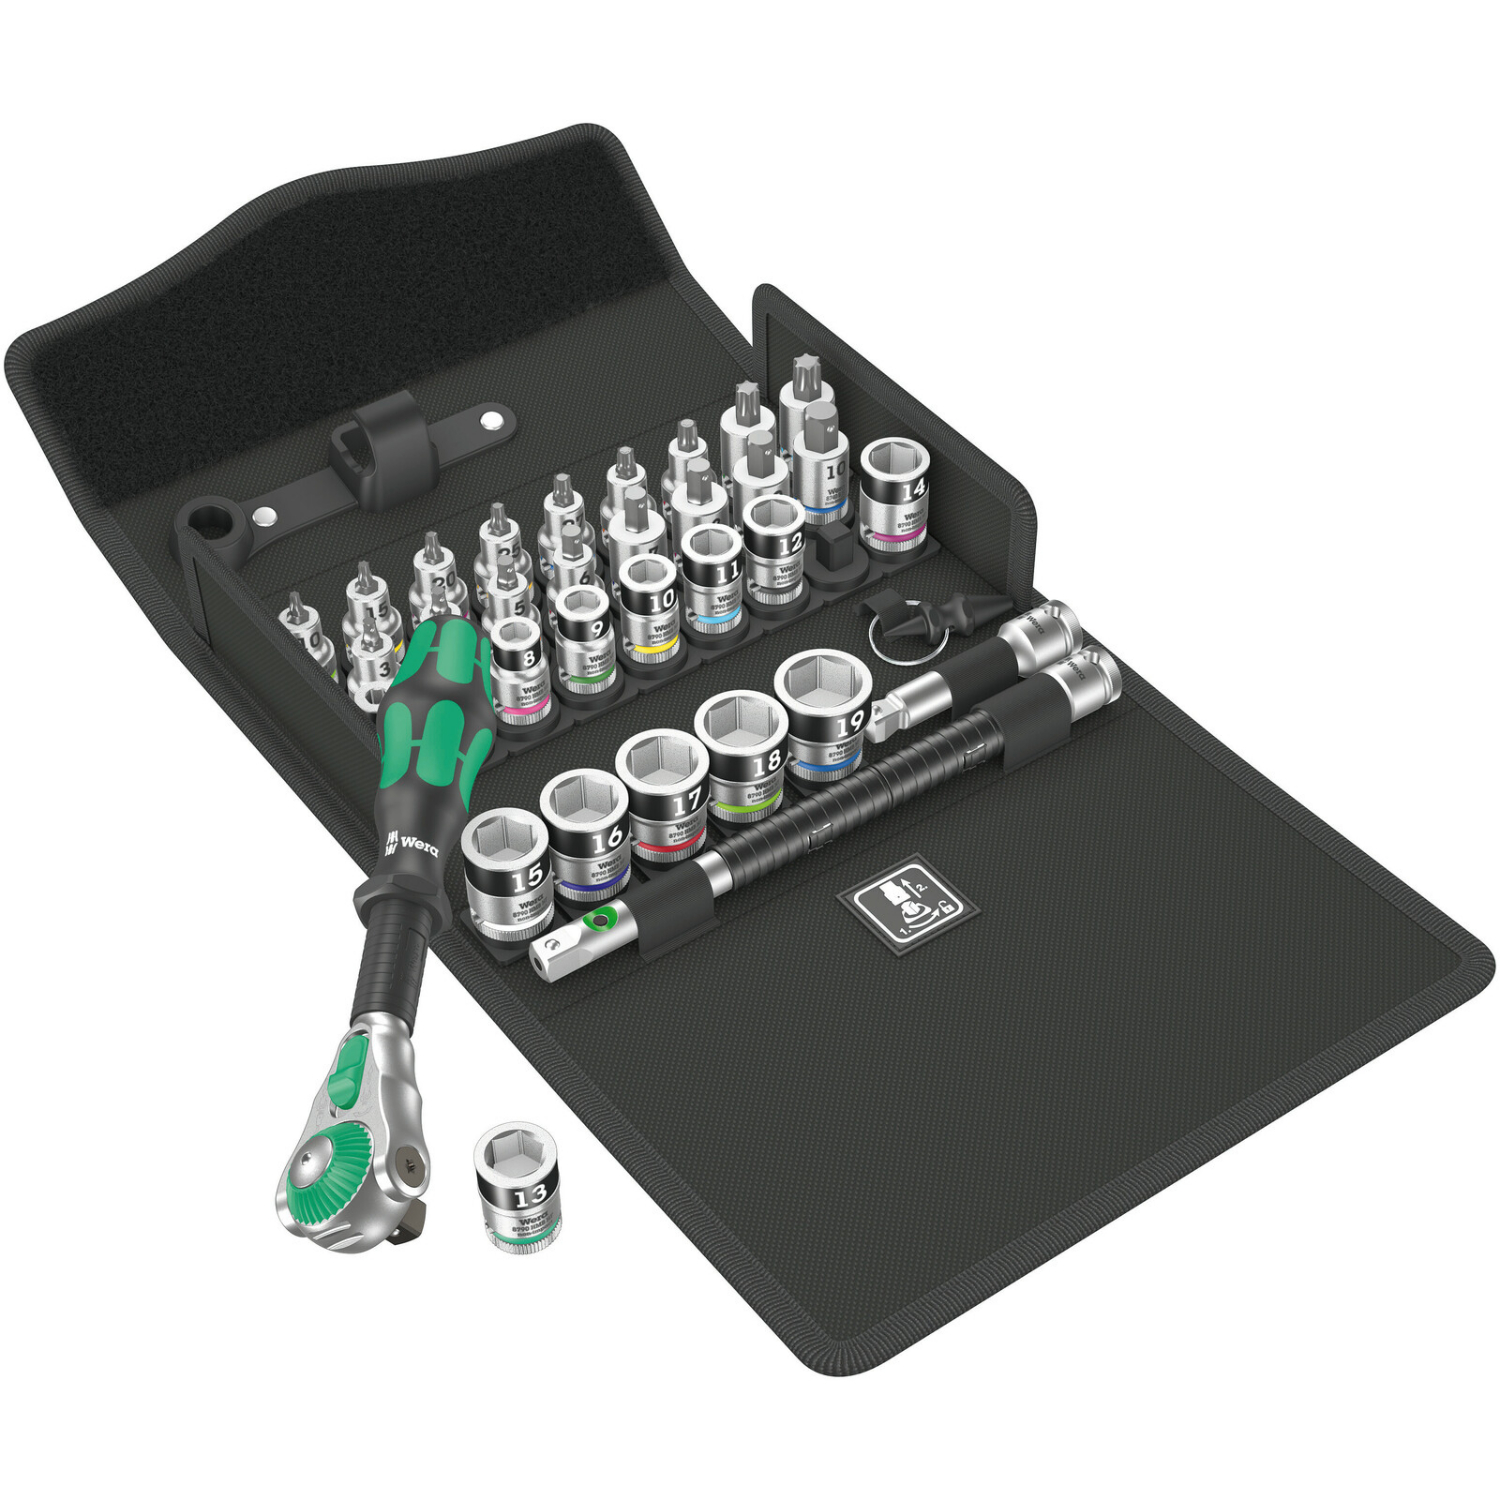 Wera 8100 SB All-in Zyklop 35-delige Speed-ratelset - 3/8"